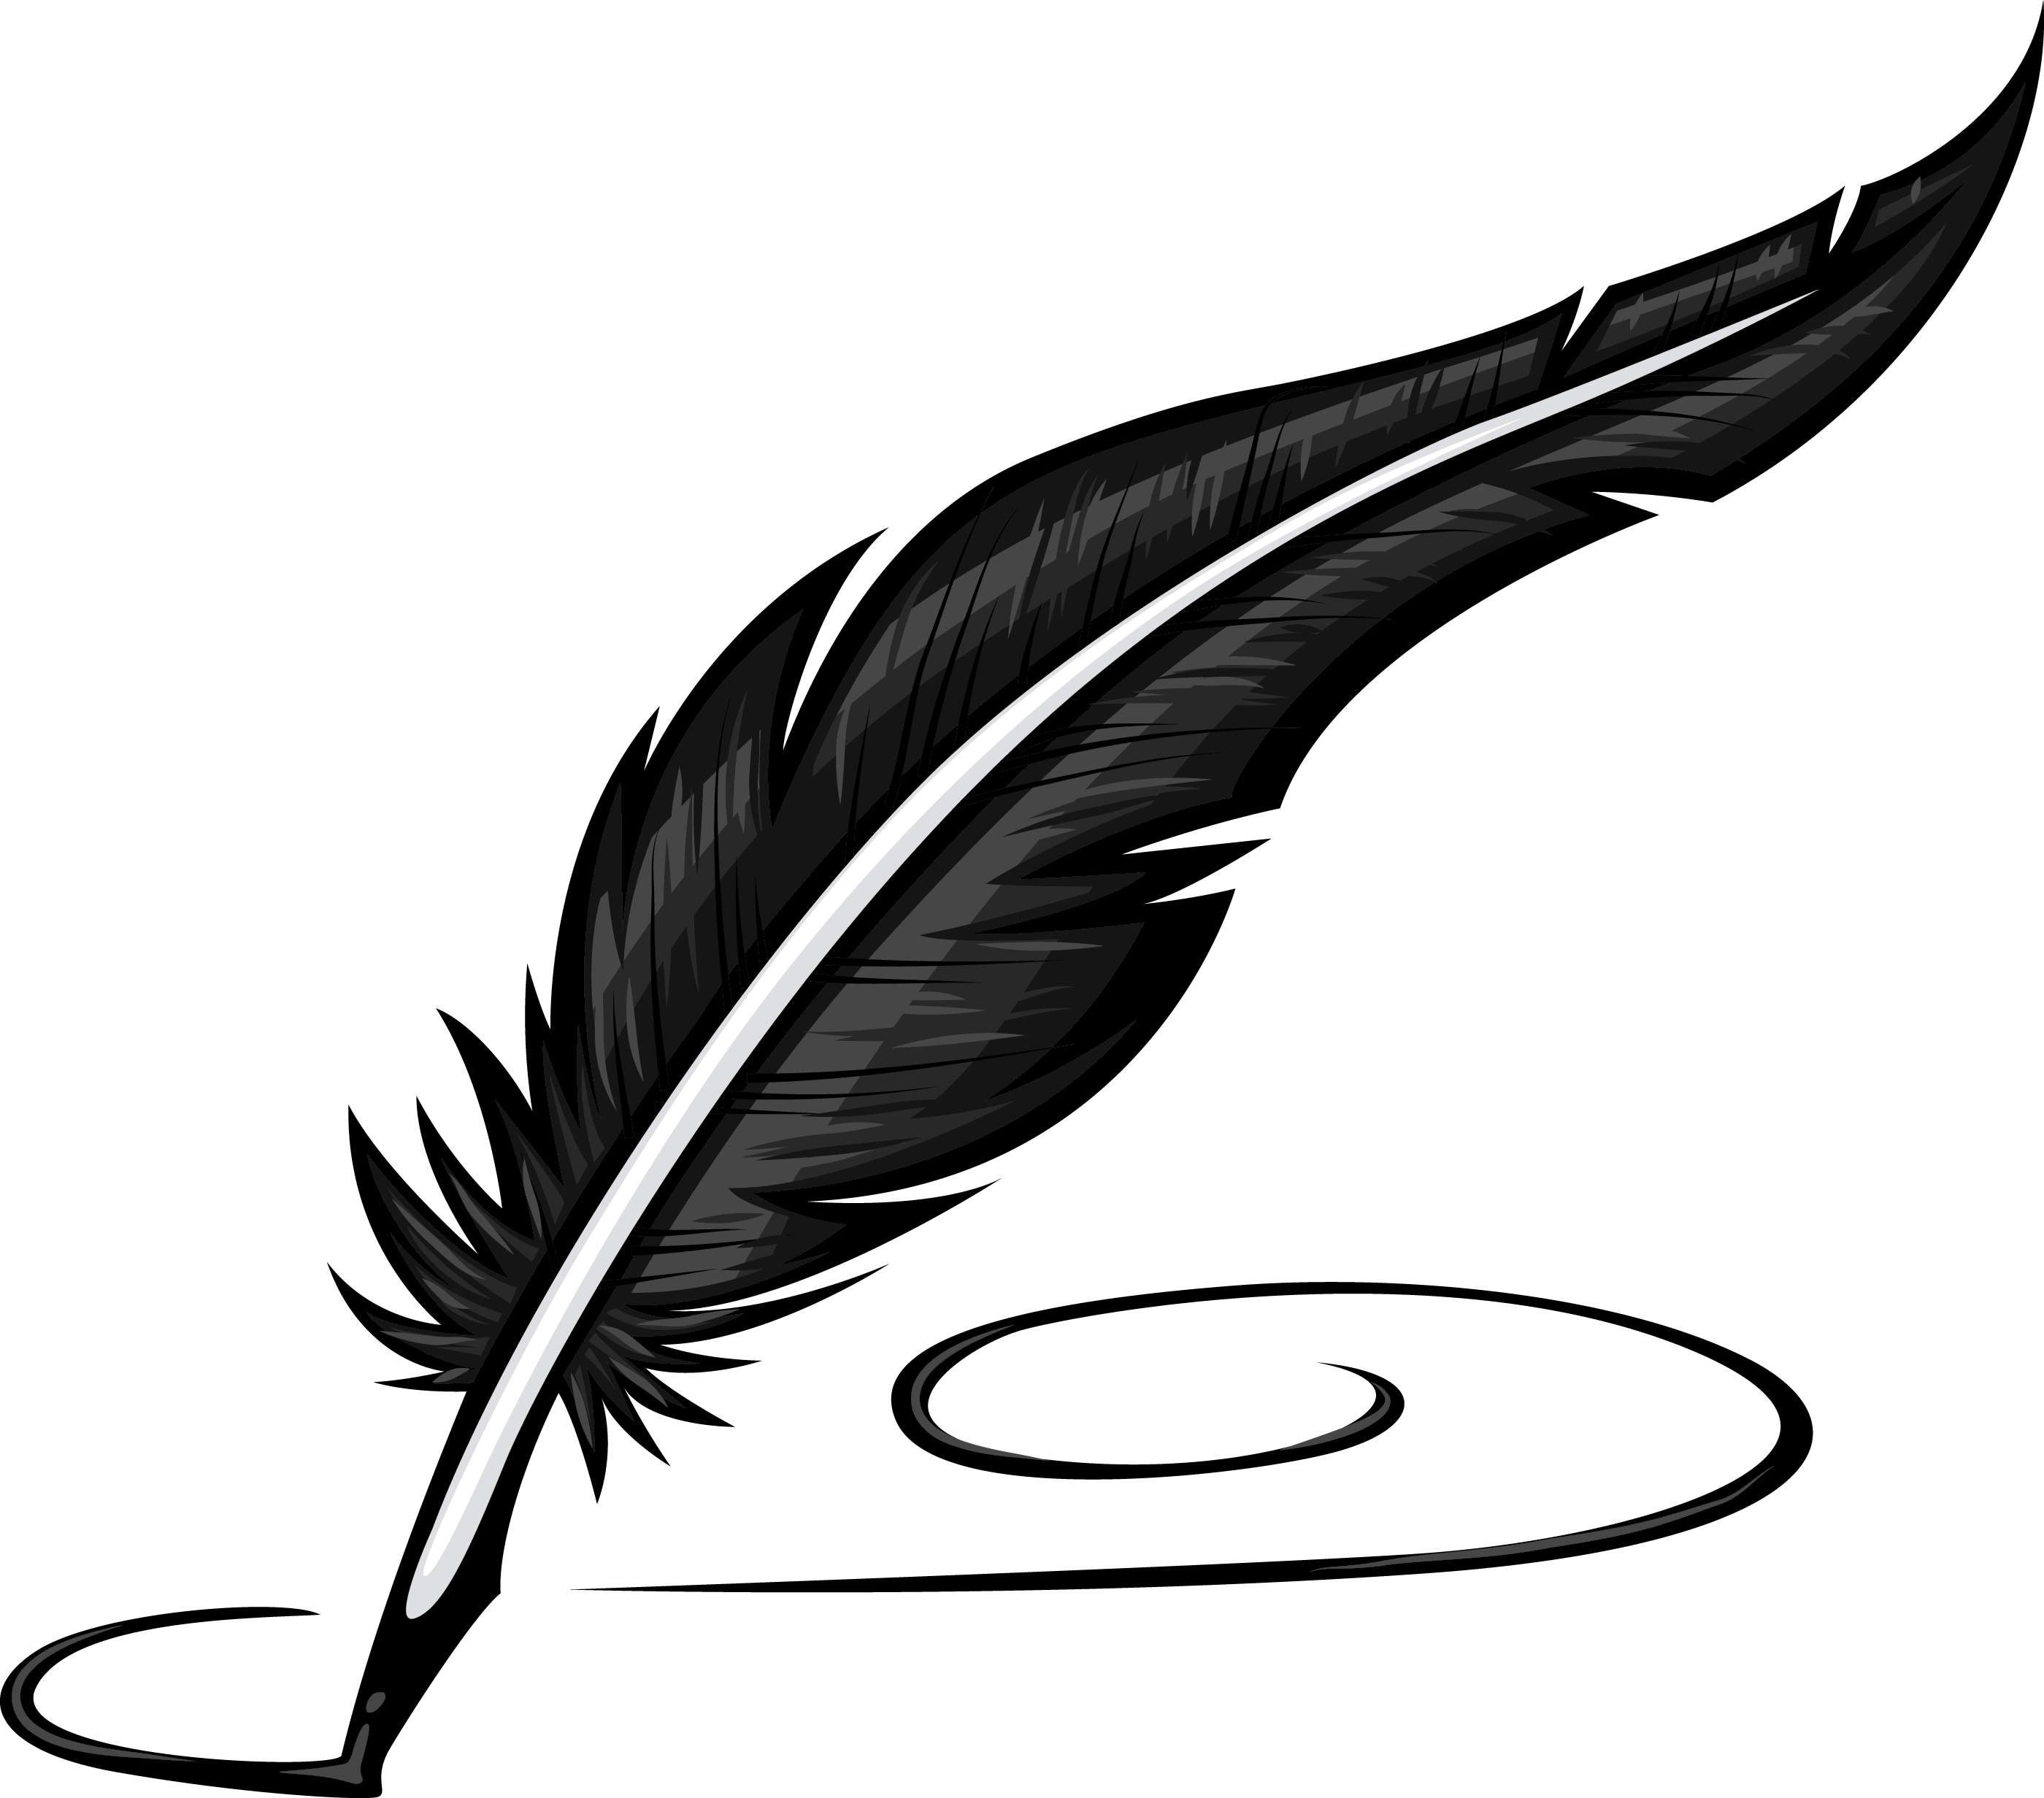 Quill and pen clipart